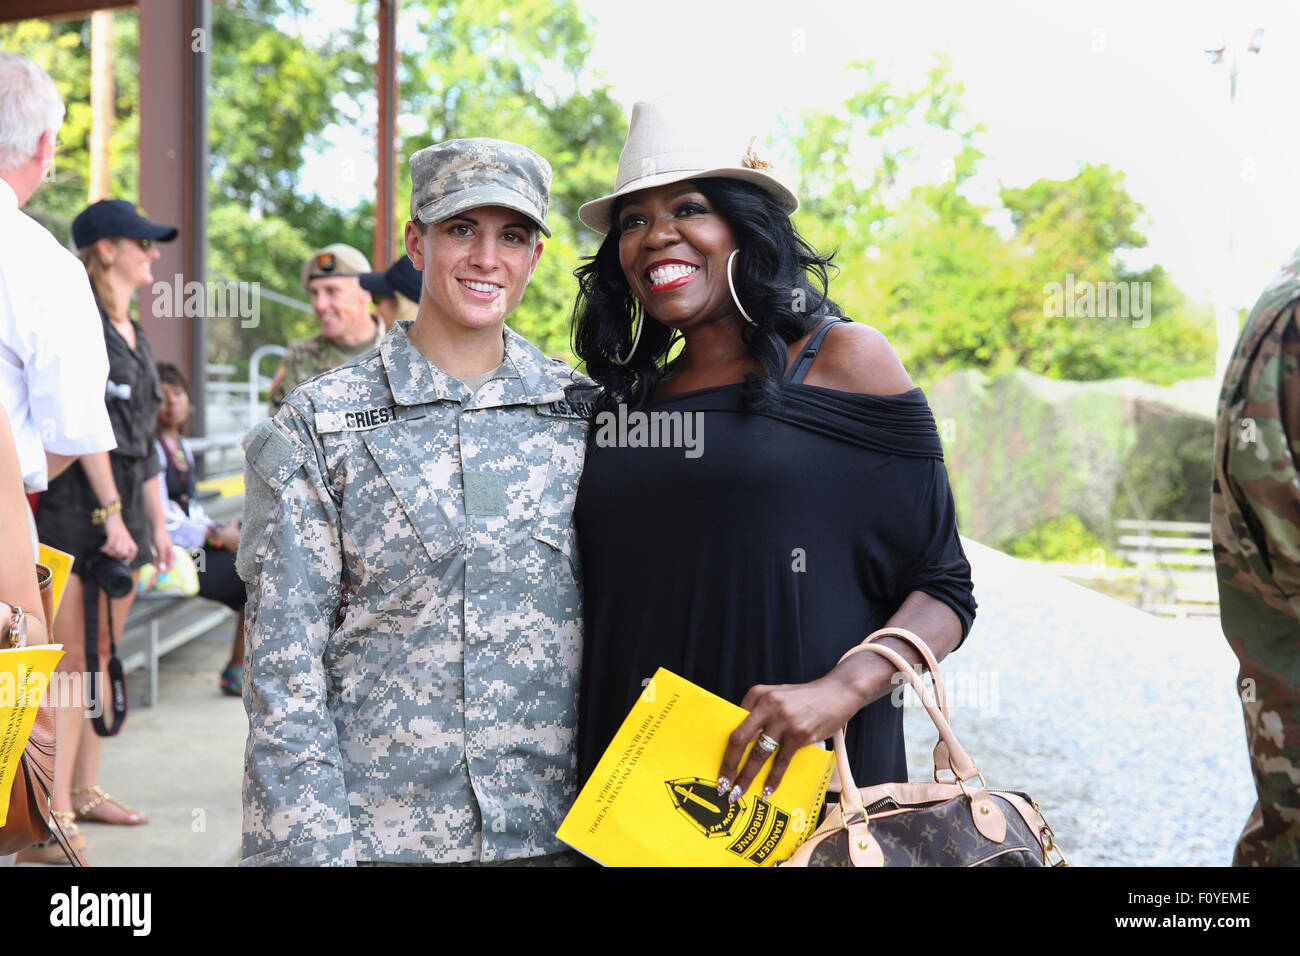 U.S. Army Captain Kristen Griest poses with a friend after graduation ceremonies at the Army Ranger school August 21, 2015 at Fort Benning, Georgia. Griest and fellow soldier 1st Lt. Shaye Haver became the first women to graduate from the 61-day-long Ranger course considered one of the most intense and demanding in the military. Stock Photo